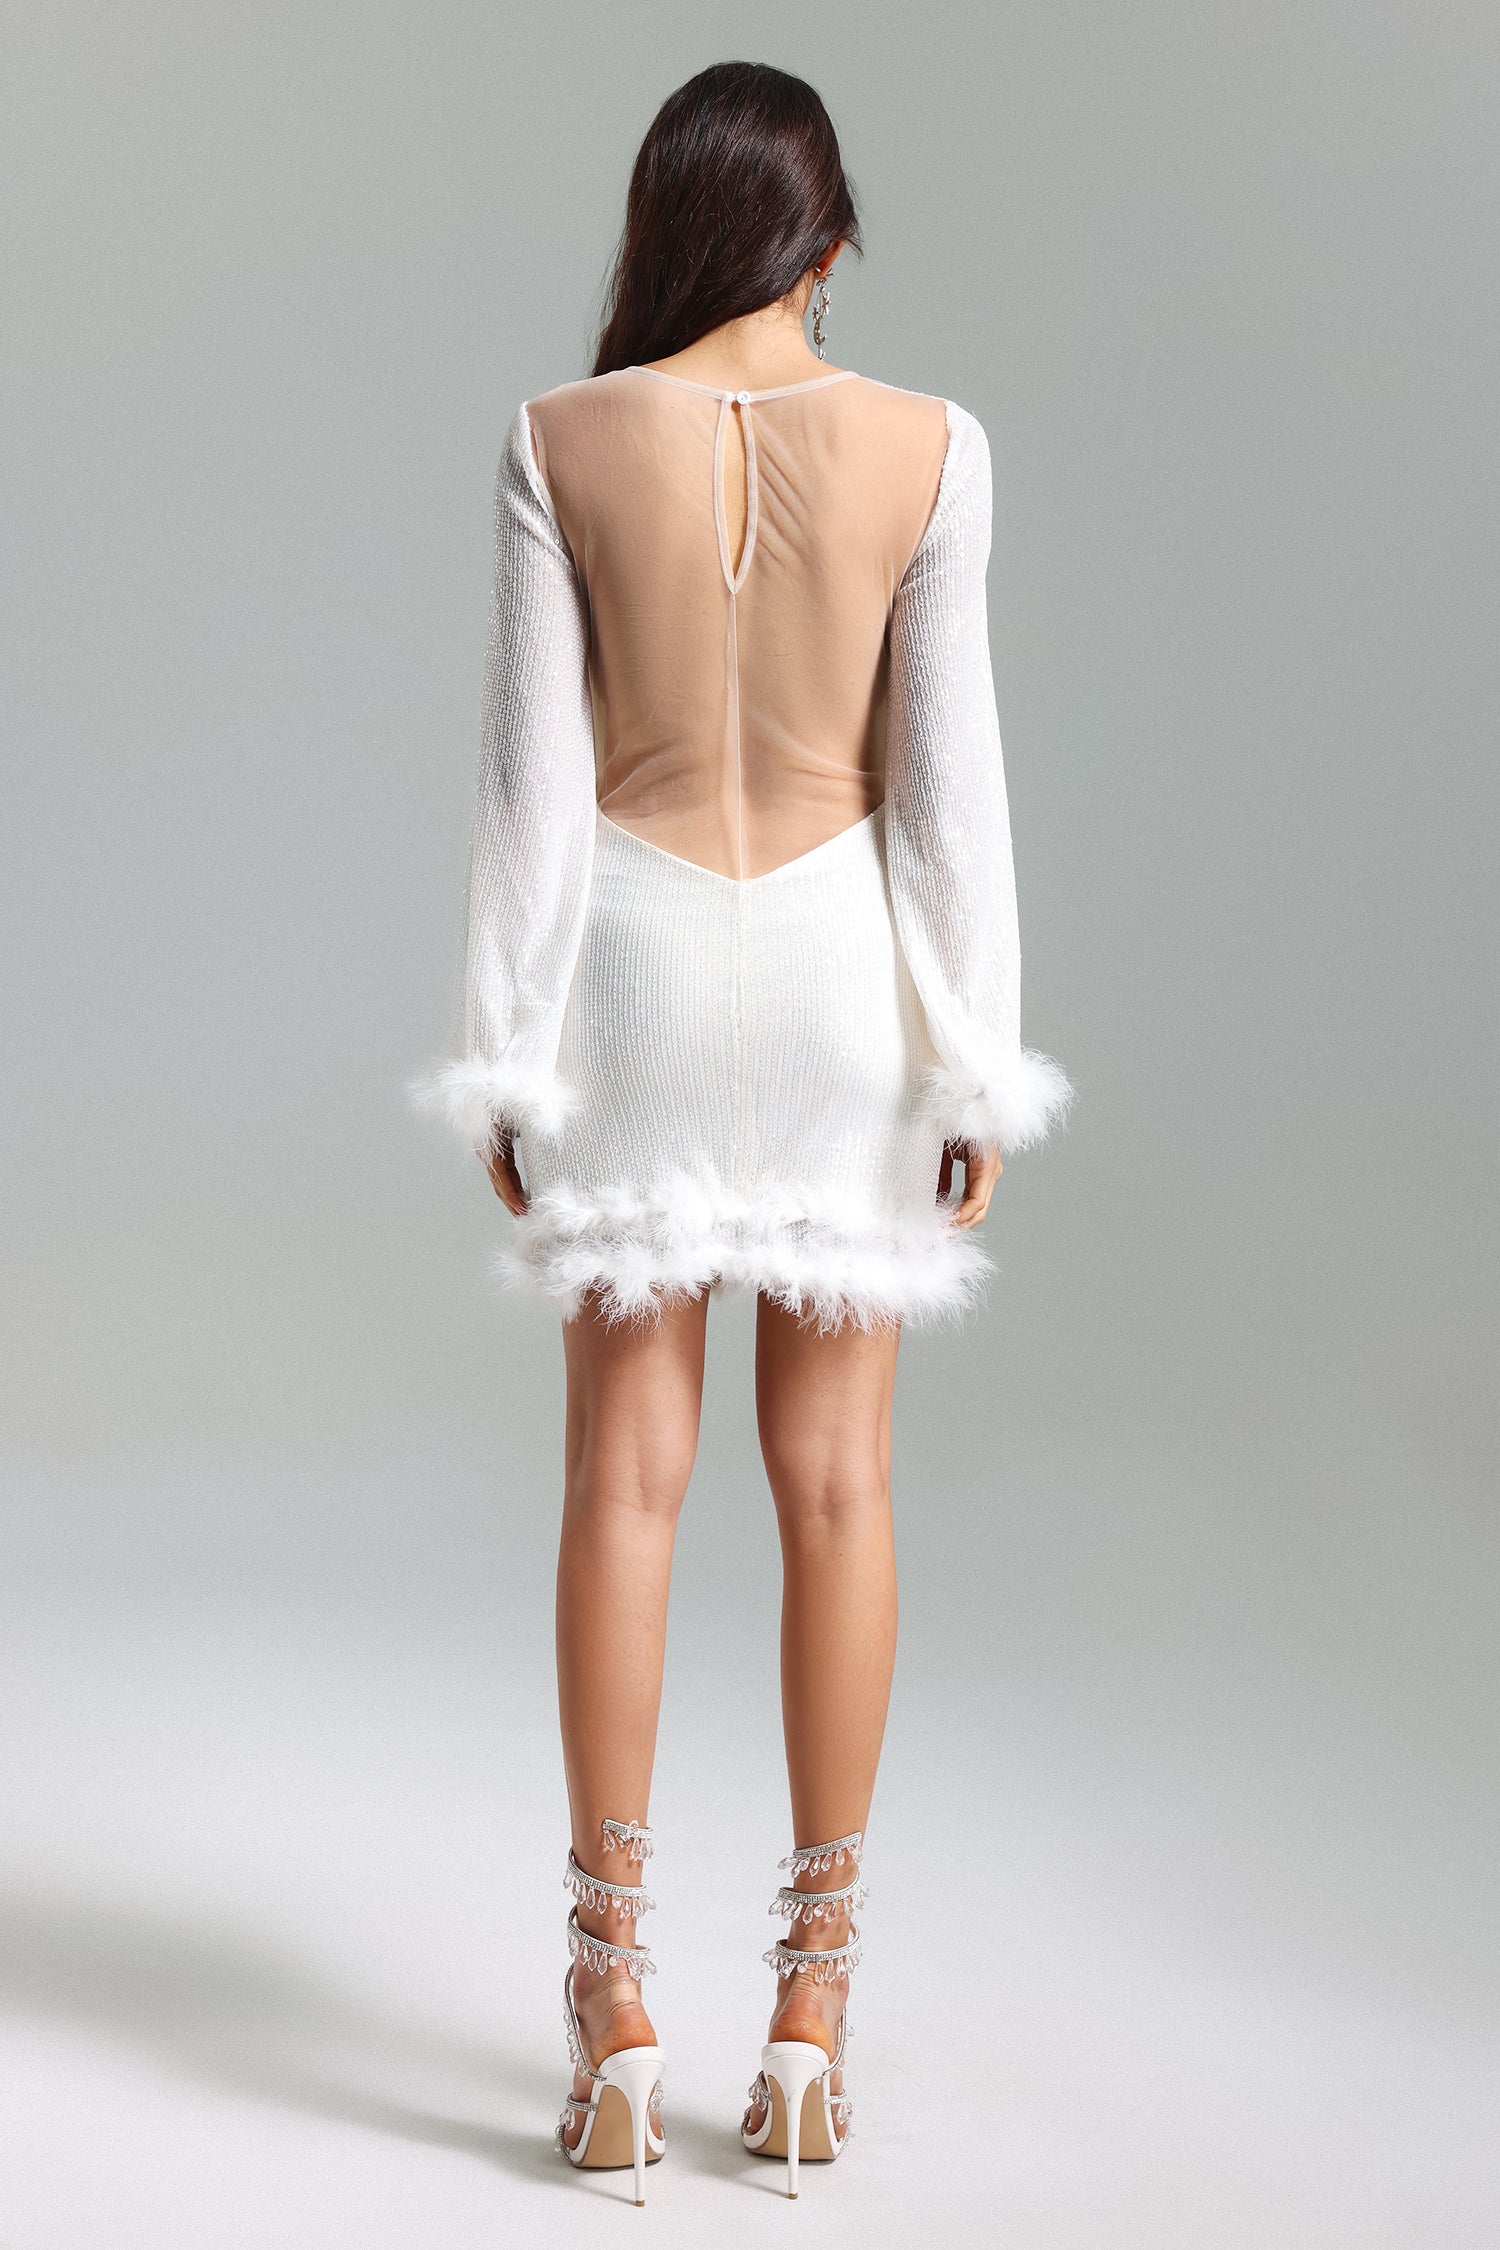 Garine Sequins Feather Backless Dress